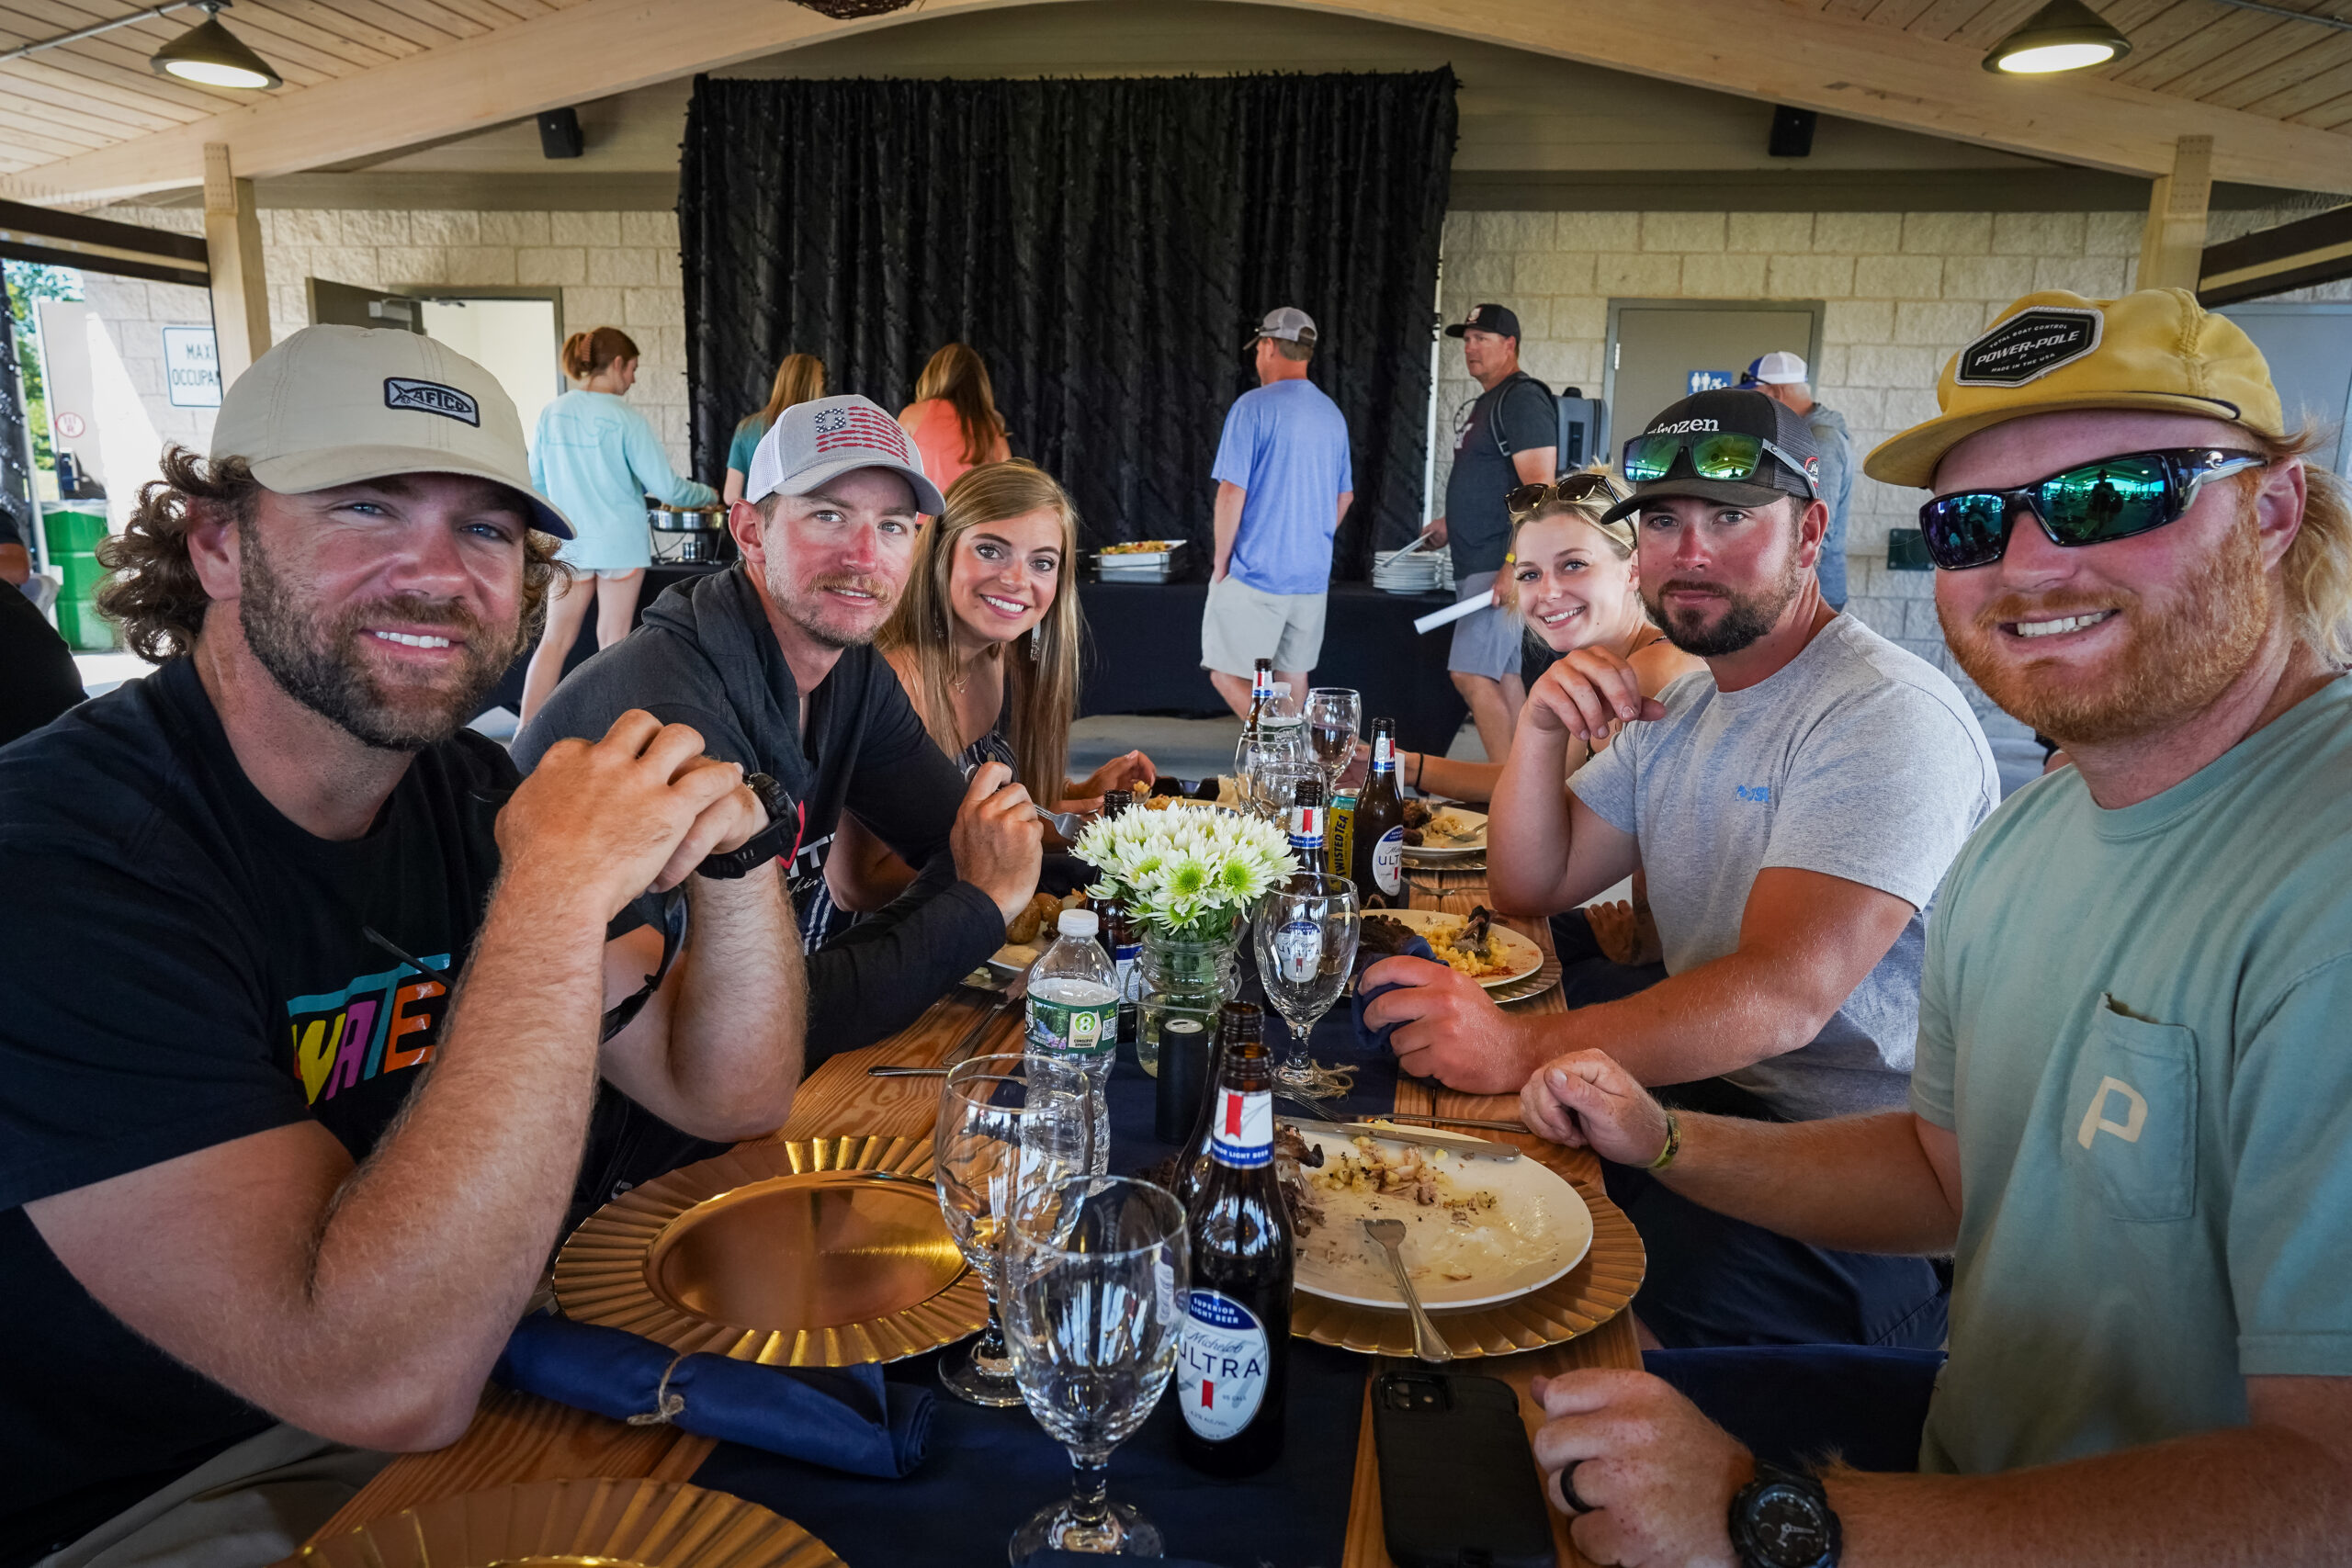 GALLERY: Food and Swag at Registration for the TITLE - Major League Fishing